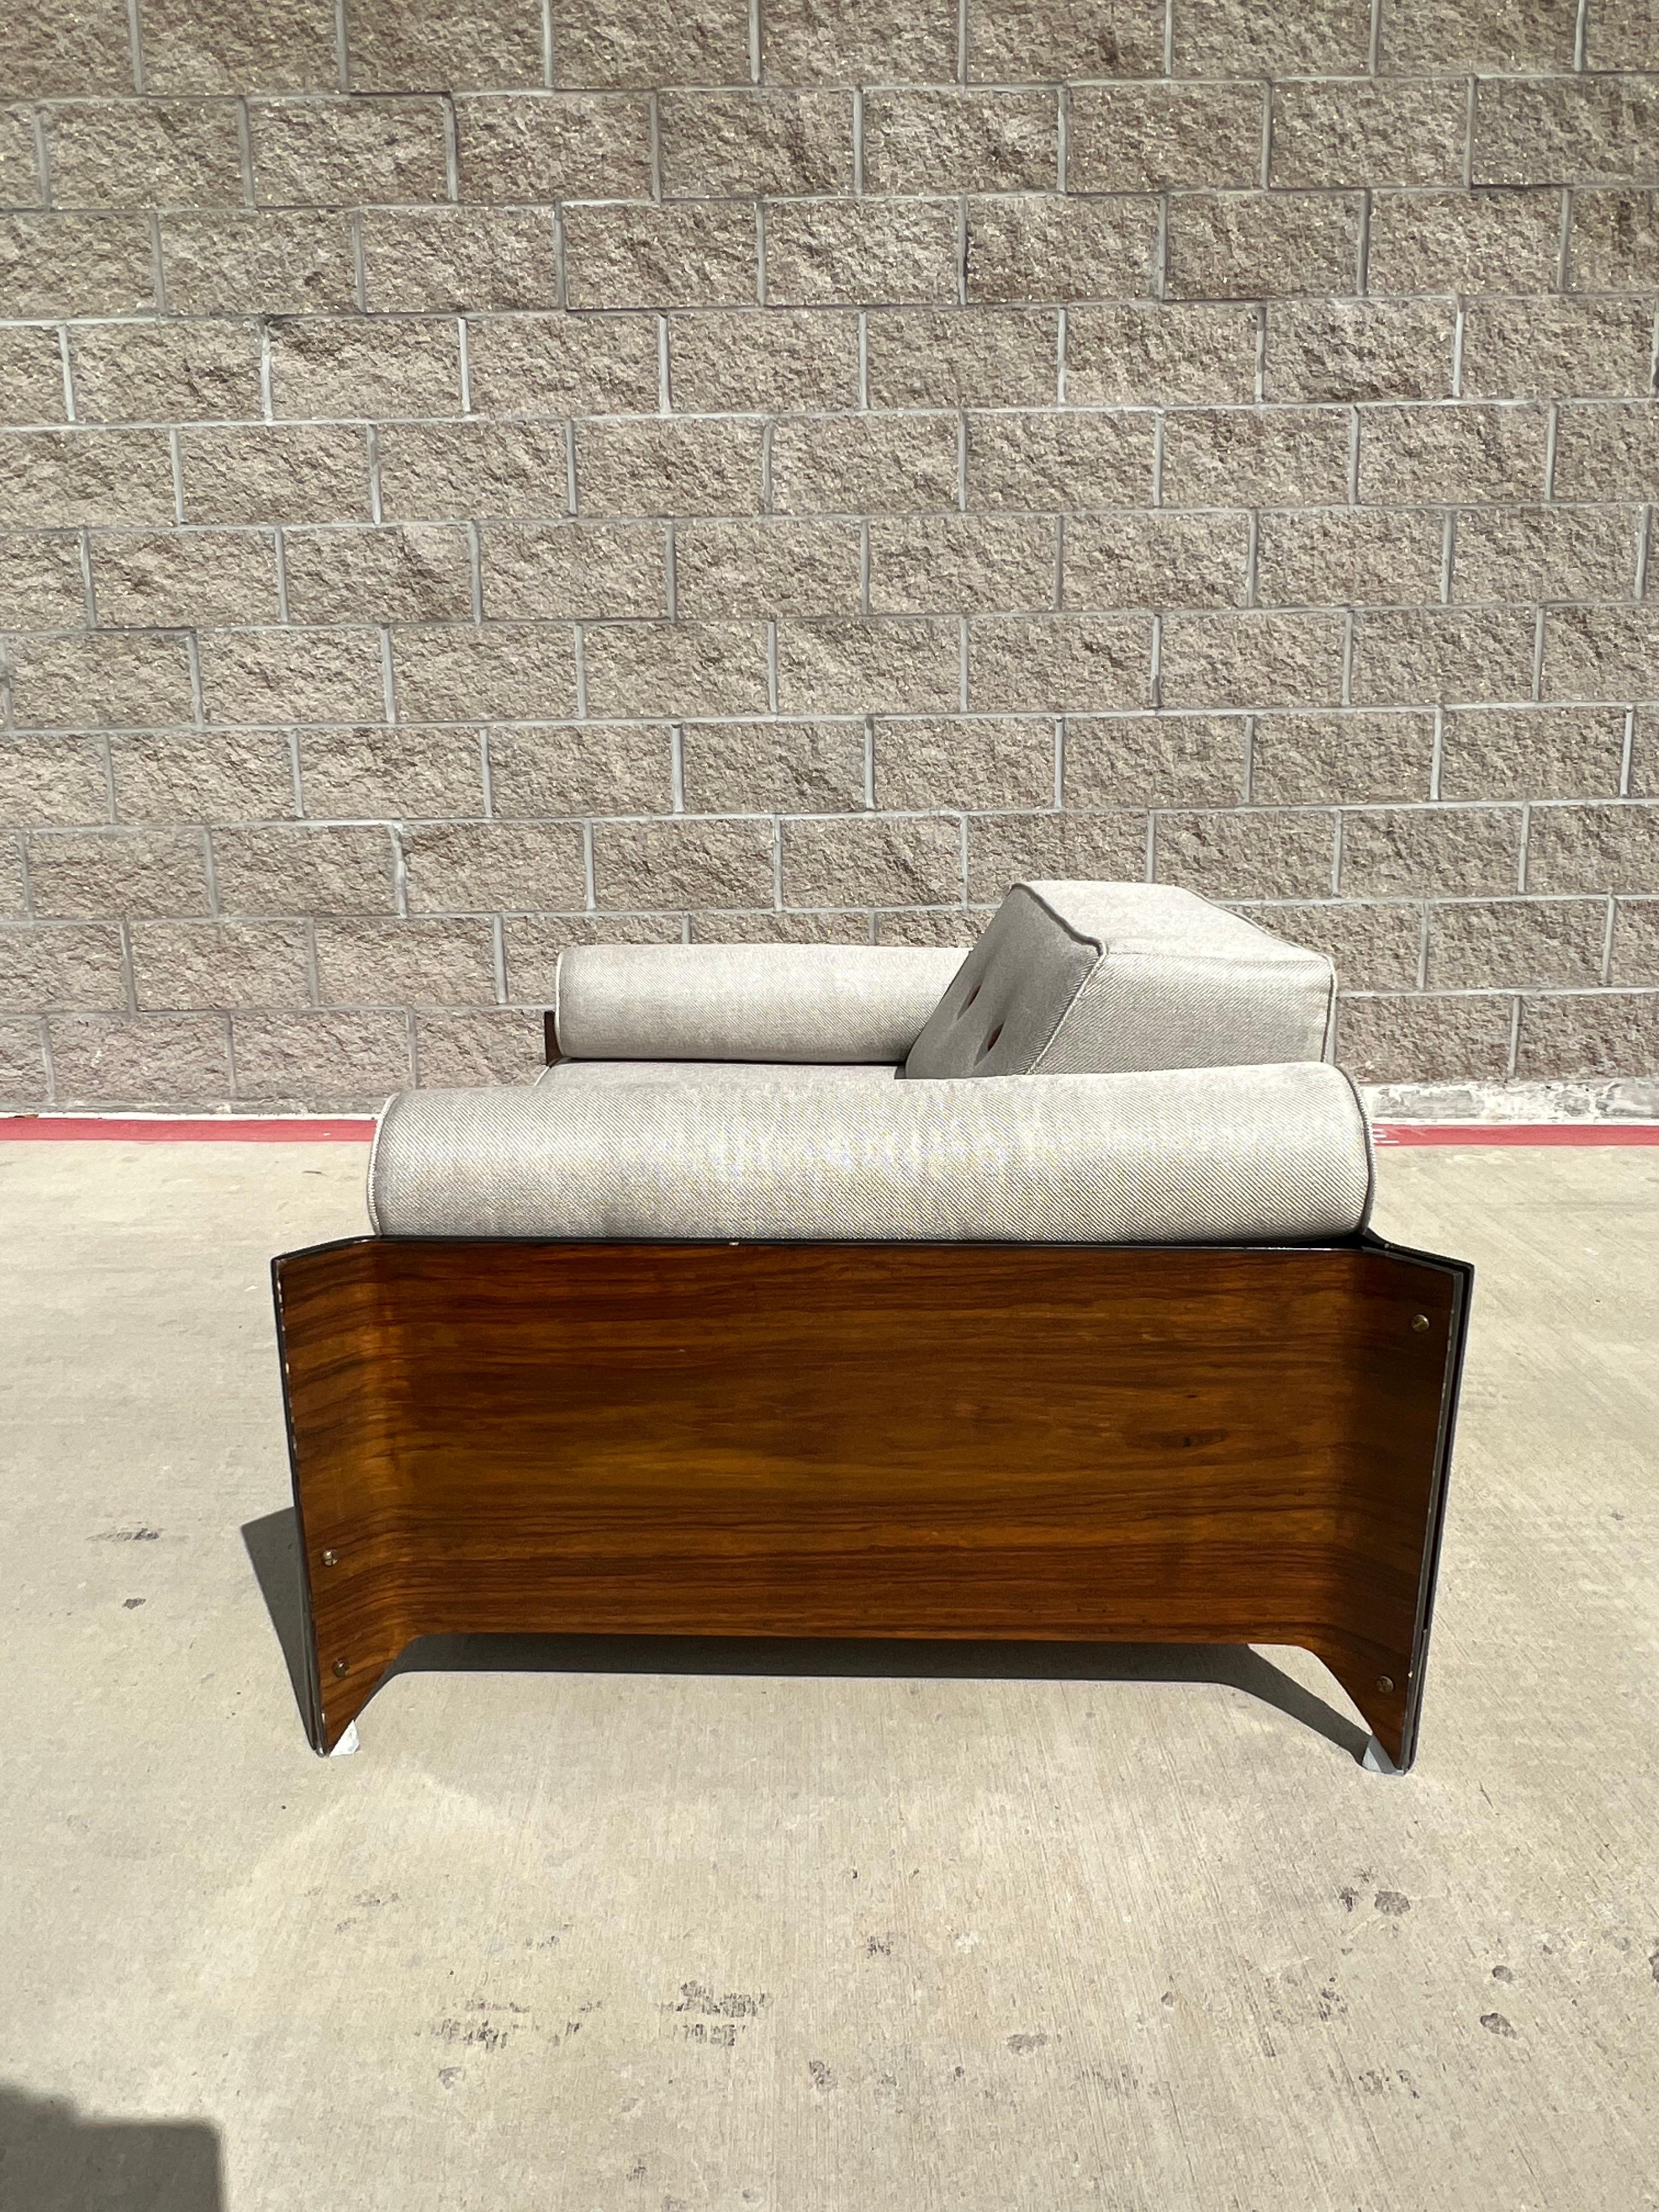 In honor of Oscar Niemeyer’s ultra-modern design for the Brazilian capital, Brasiliana was created in the 1950s by Jorge Zalszupin. The curved wooden frame is enriched by handcrafted details like carved wooden upholstery buttons and brass